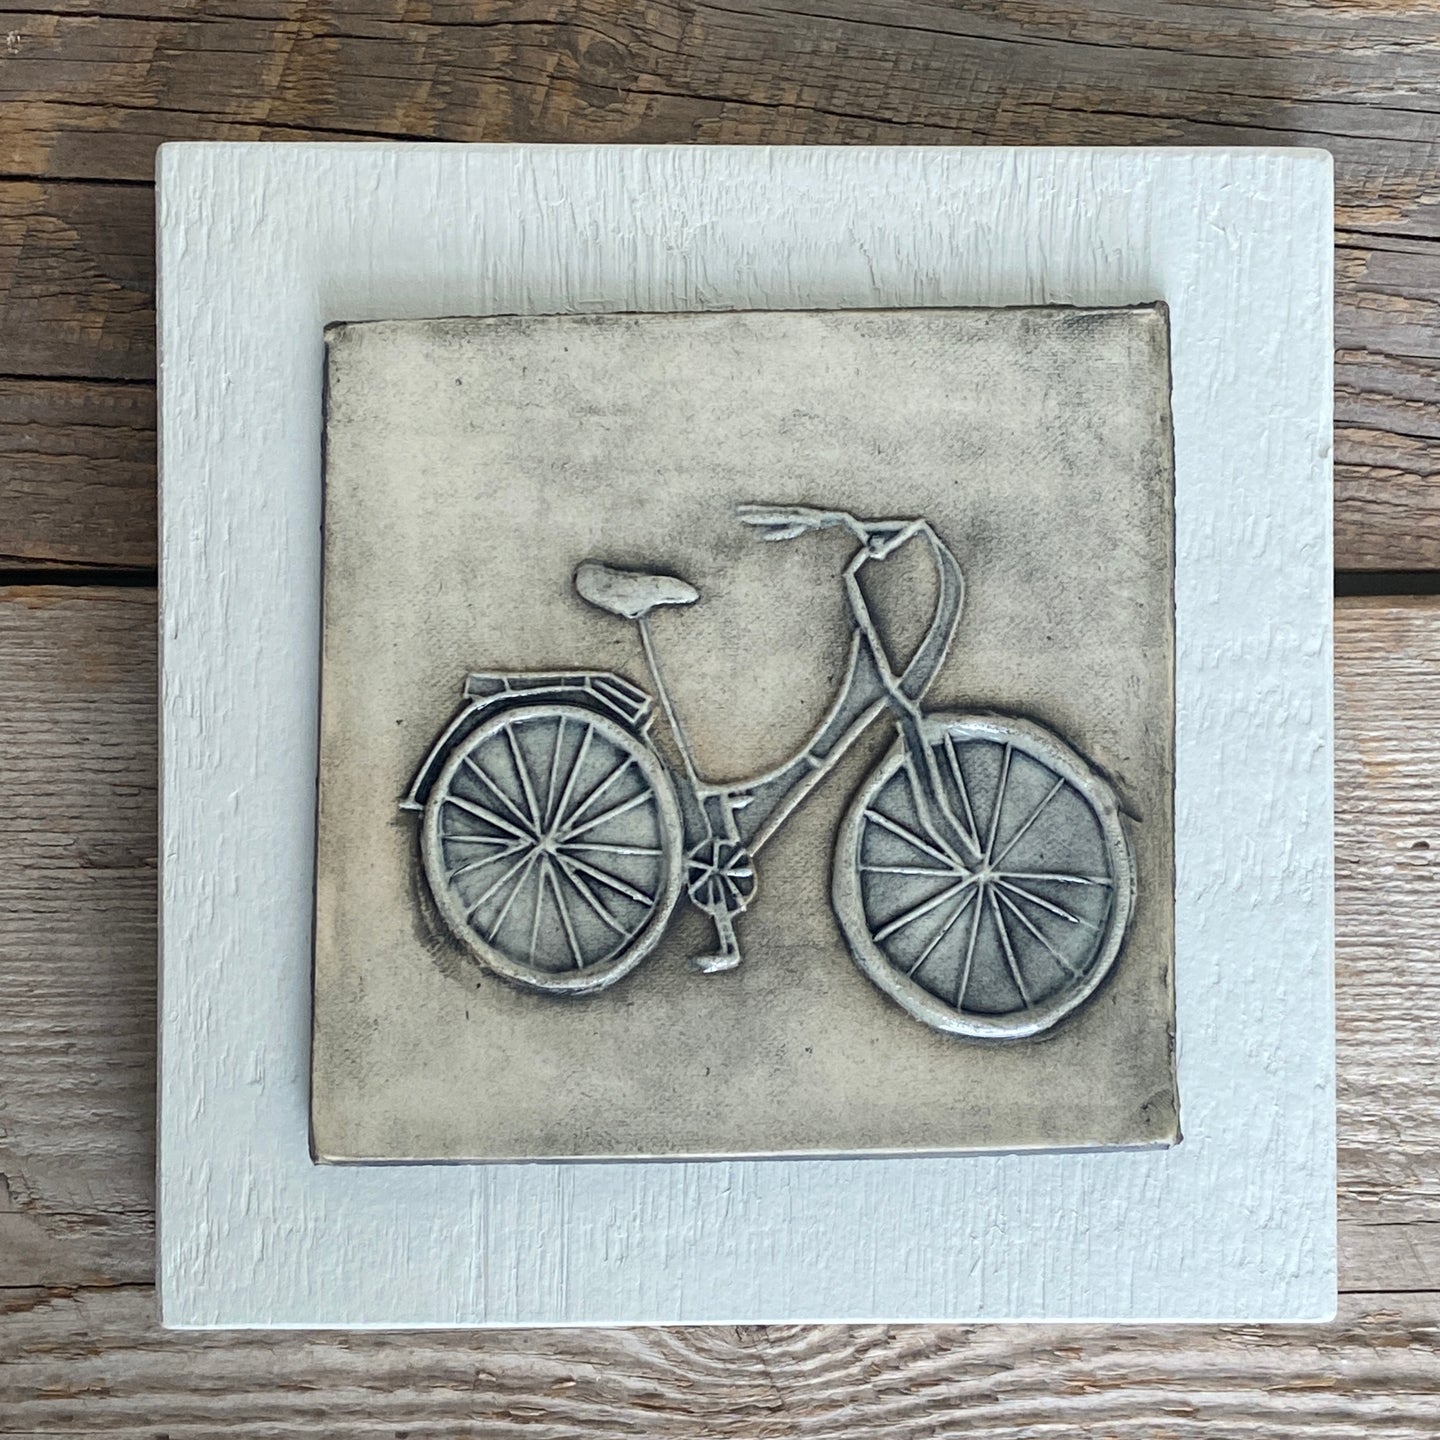 ART BLOCK WITH BICYCLE